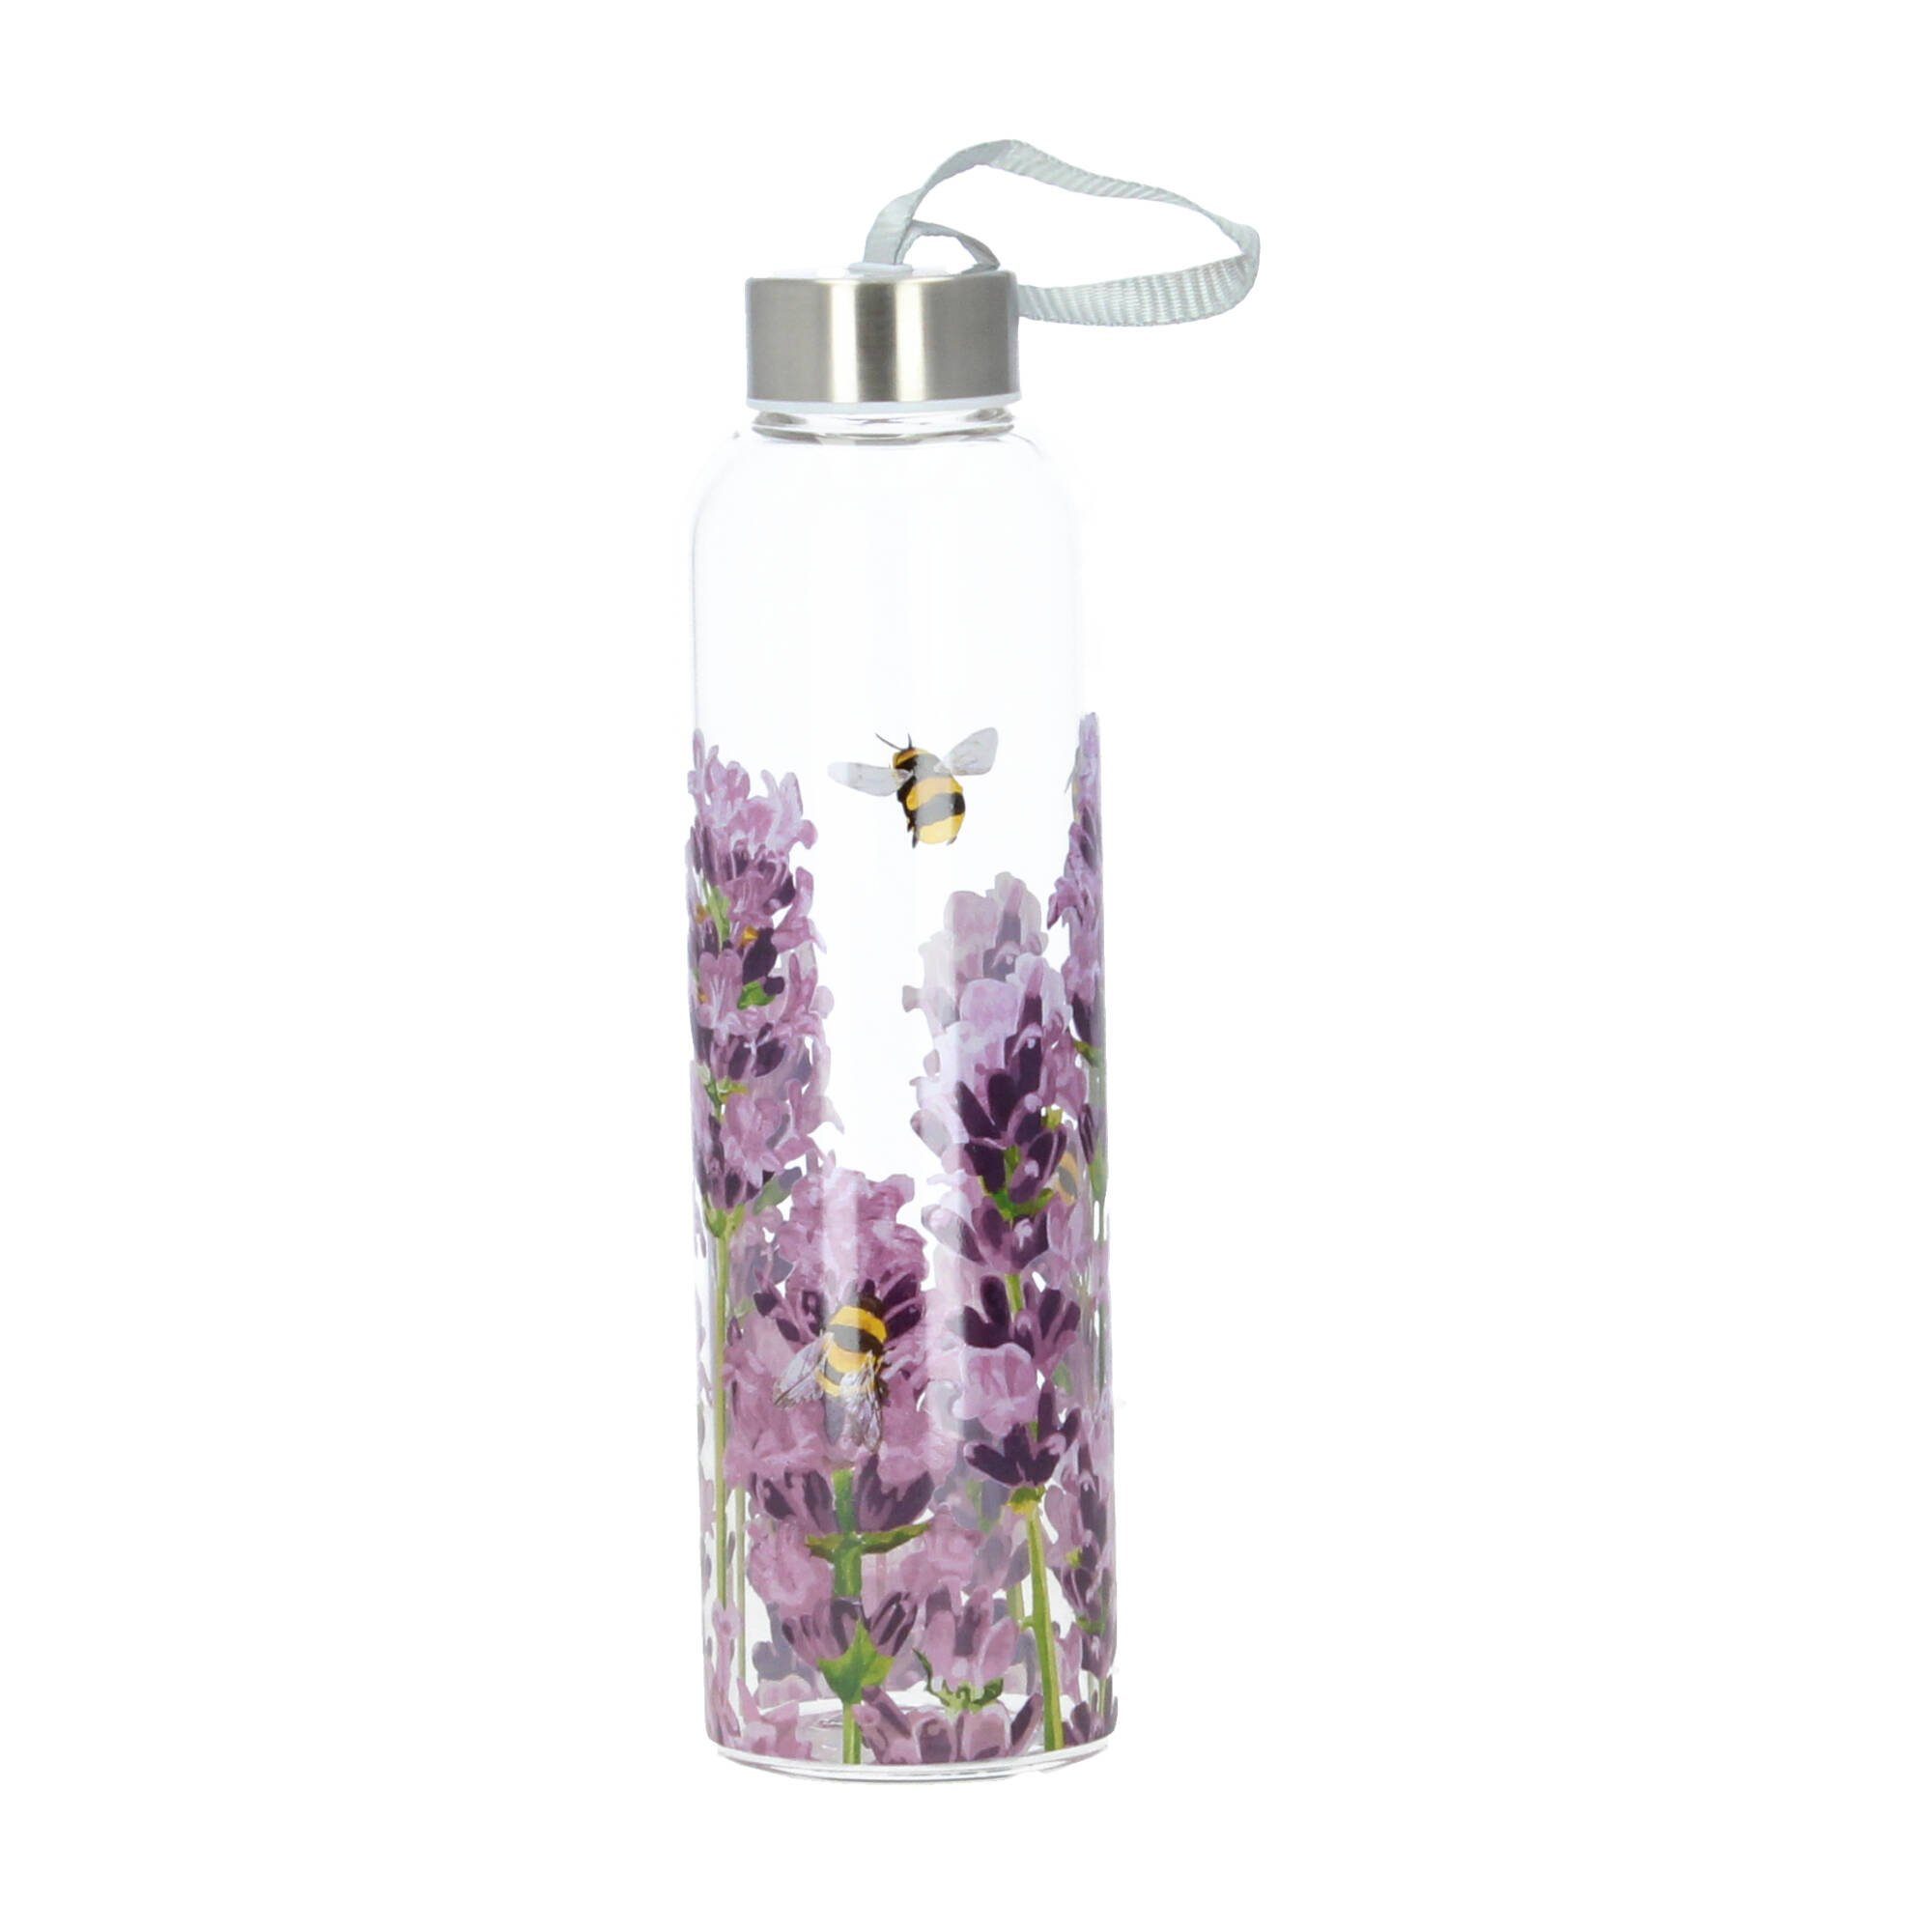 PPD Trinkflasche Glasflasche Bees & Lavender Bottle 500 ml